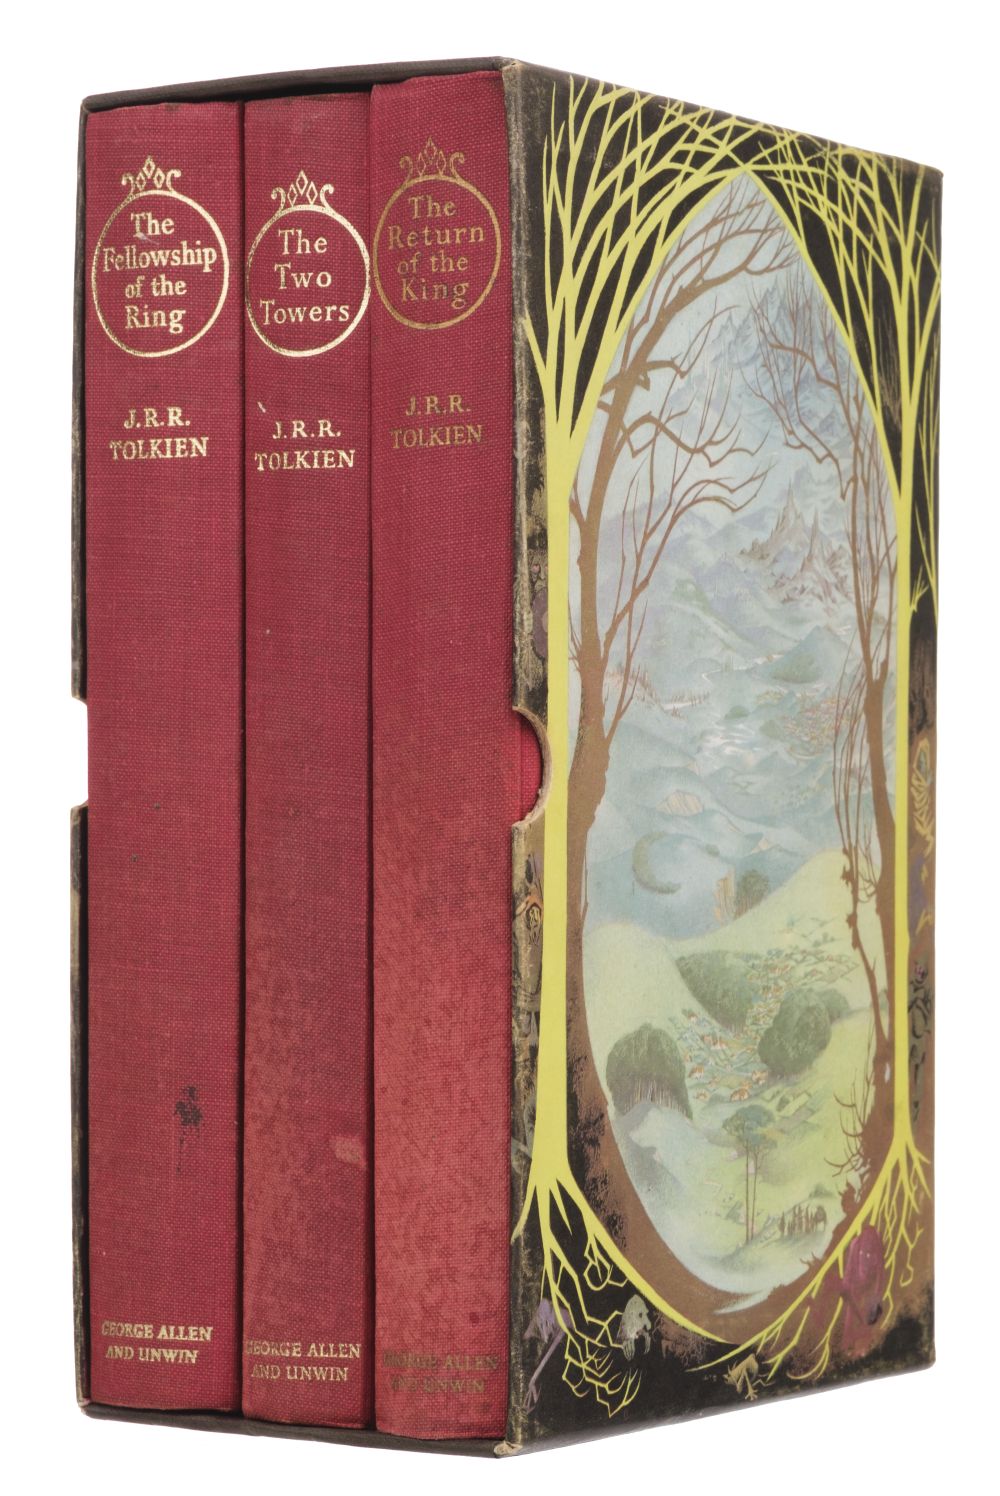 Tolkien (J.R.R.) Lord of the rings 3 volumes mixed impressions 500-800